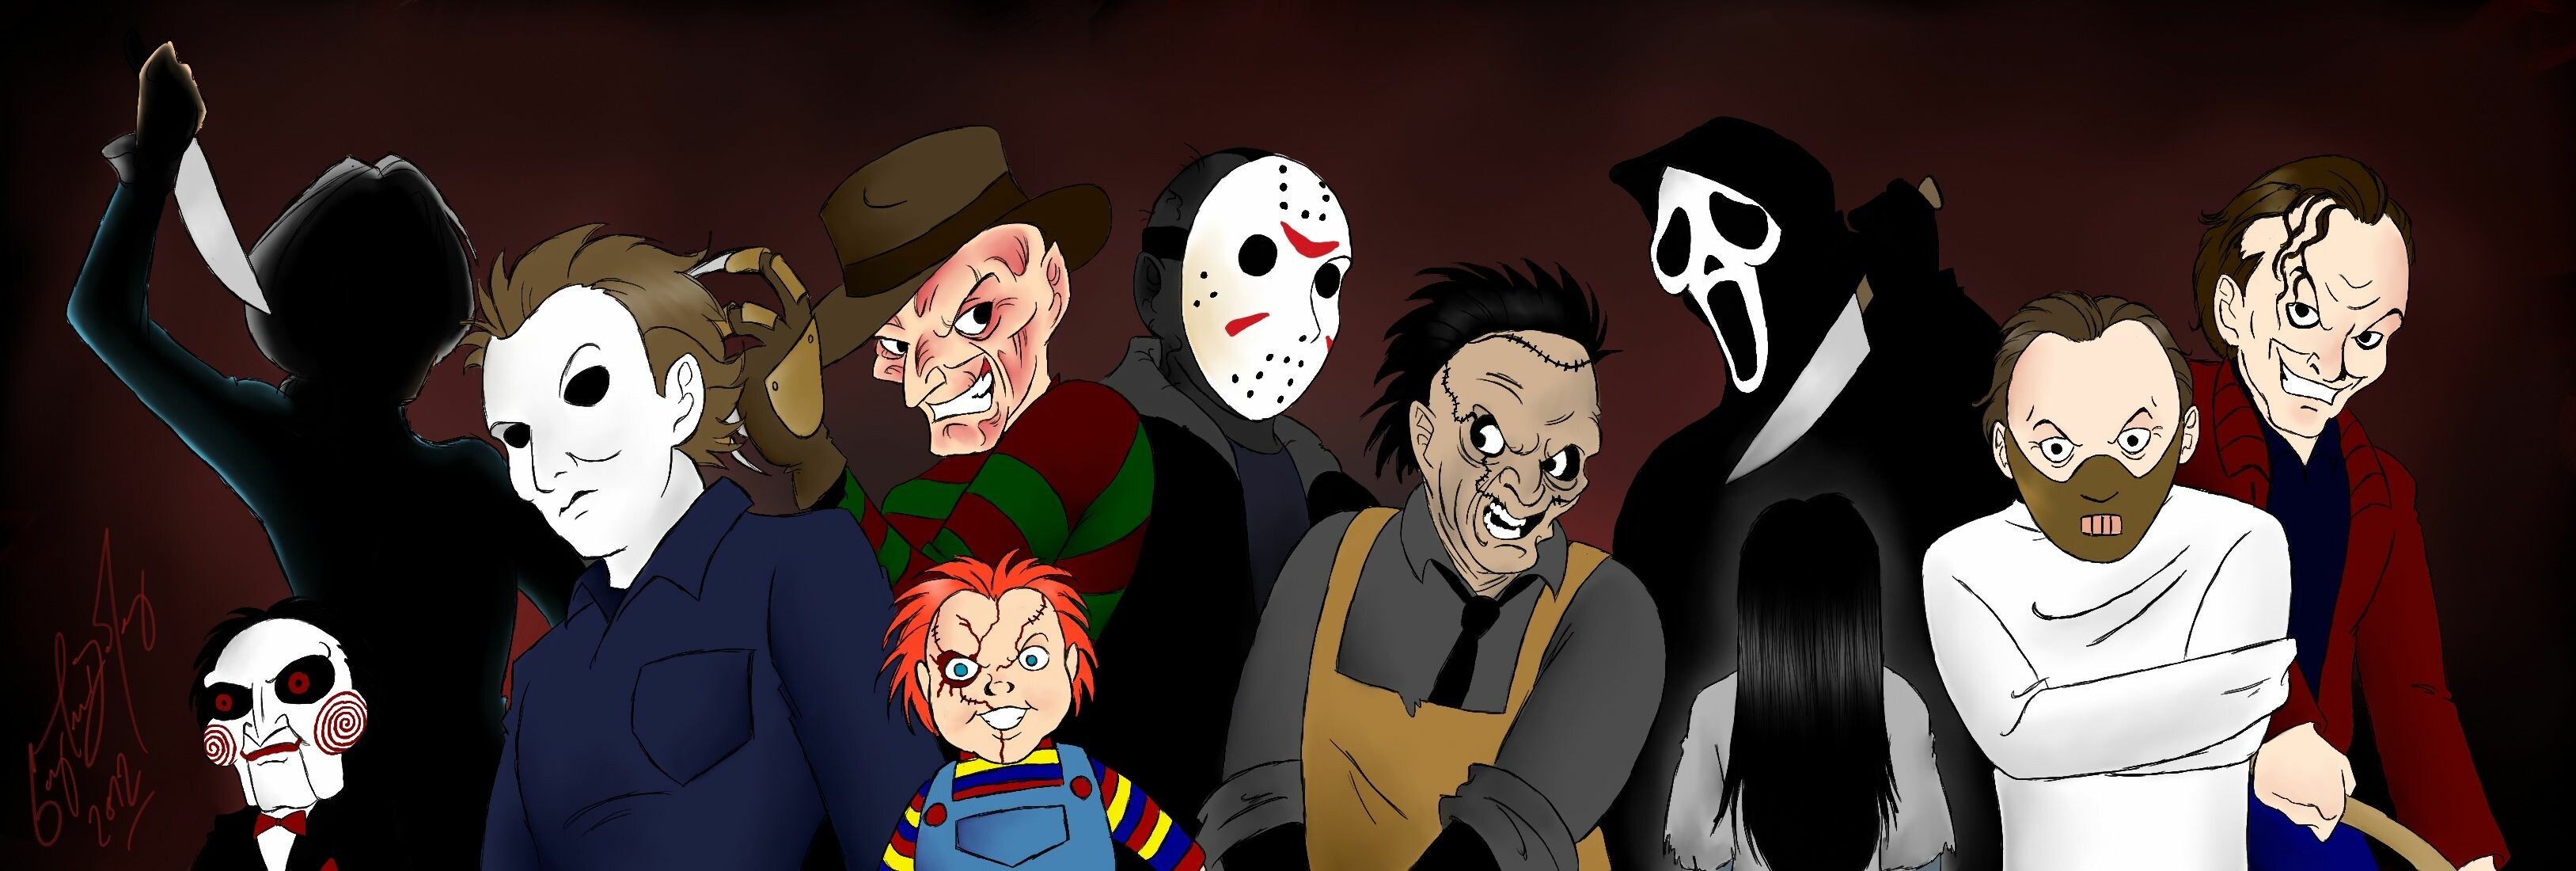 30 Wallpaper Characters from horror movies DOWNLOAD FREE 14073